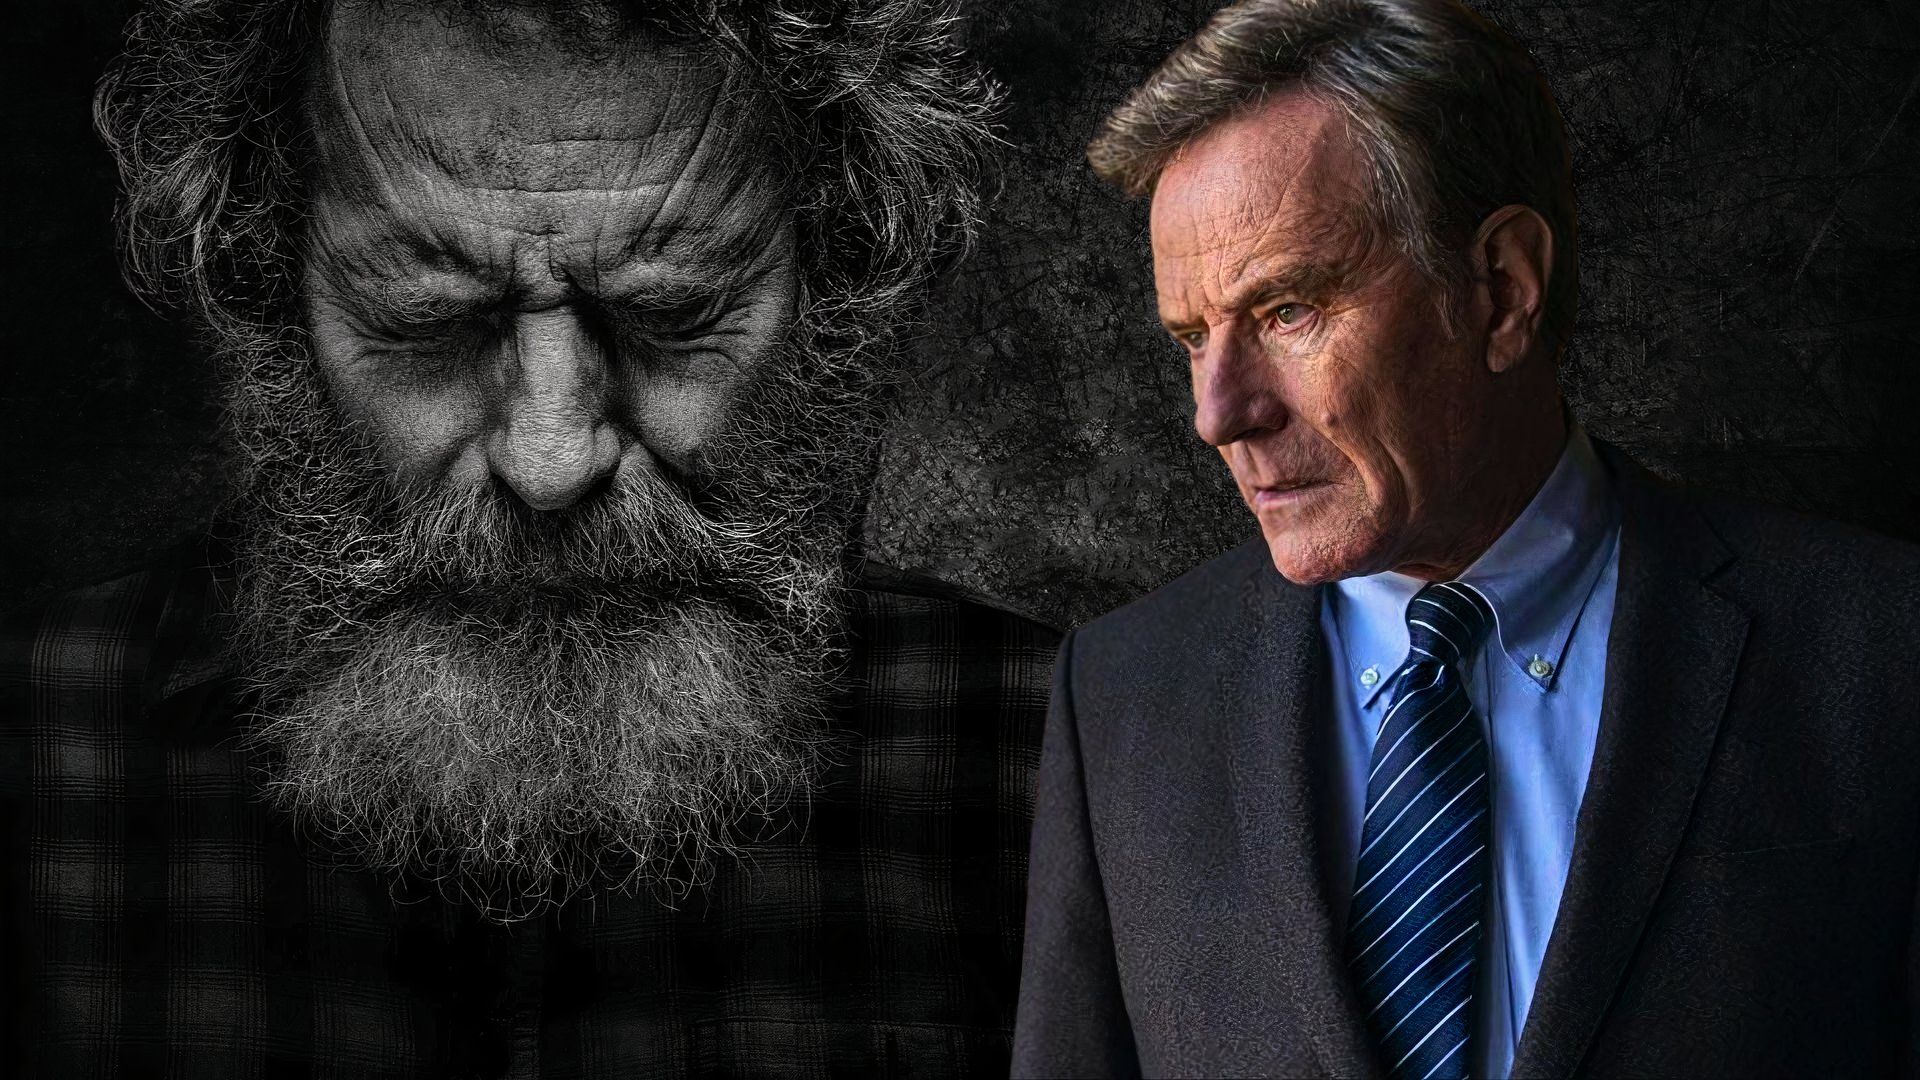 An edited image of Bryan Cranston as Michael wearing a suit and tie and with long hair and a beard in Your Honor